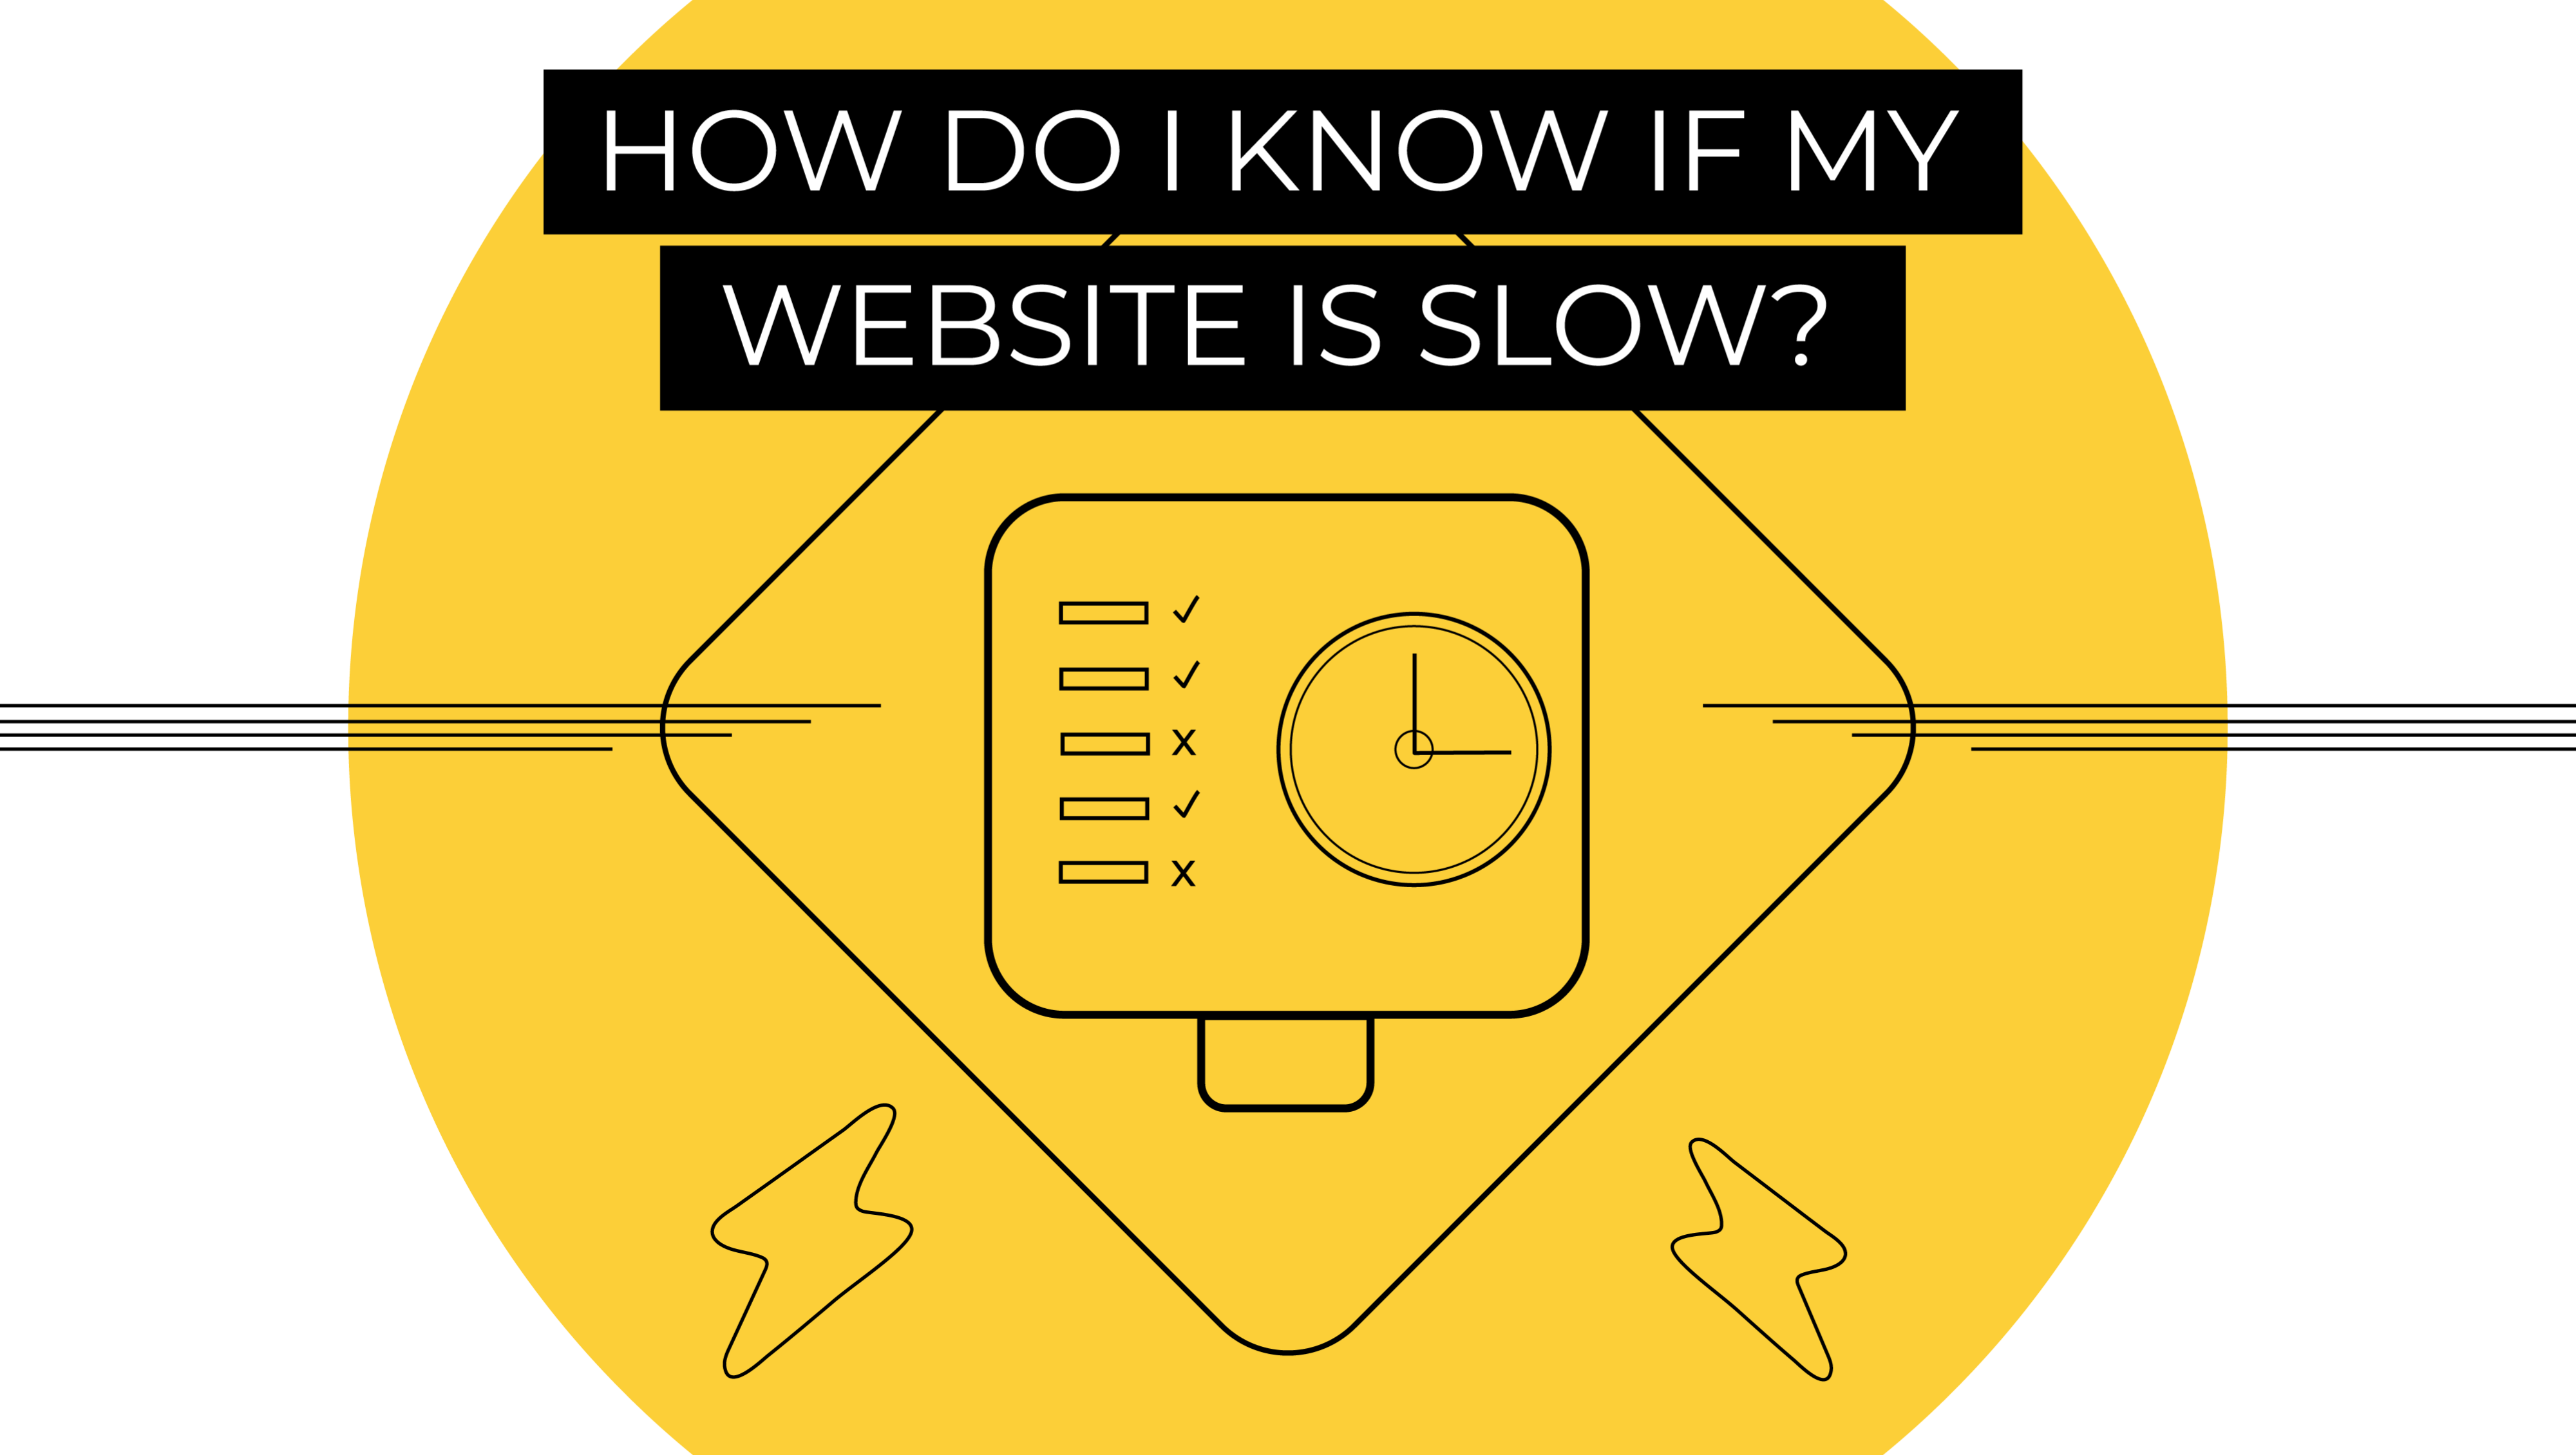 How Do I Know If My Website Is Slow?